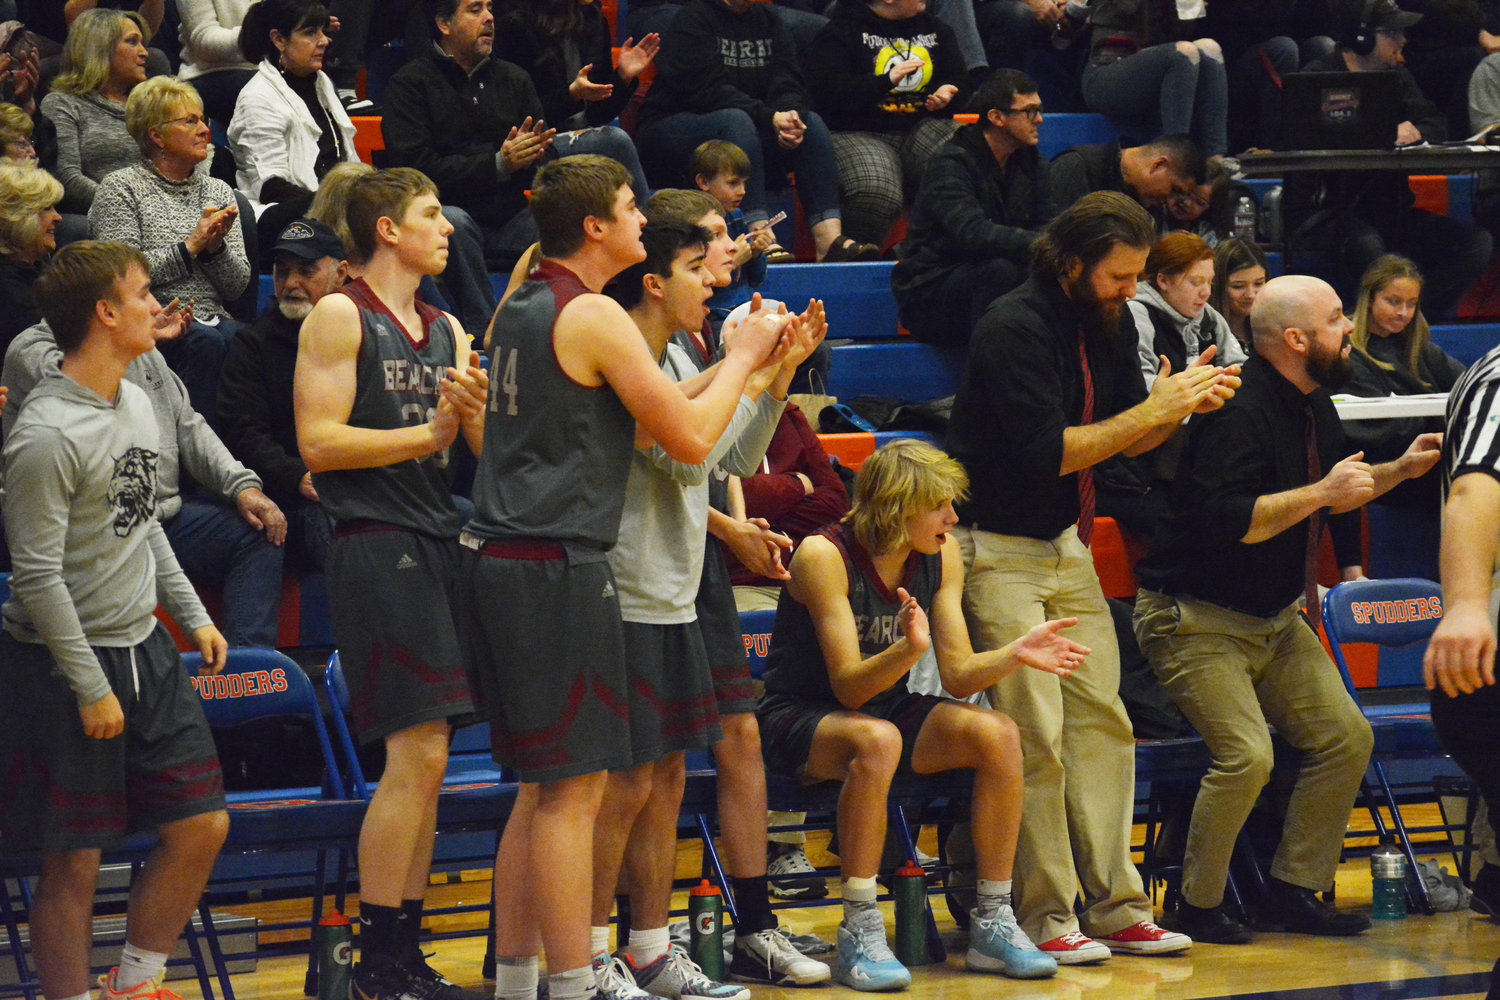 W.F. West's bench reacts to a play against Woodland in the district semifinals on Tuesday.